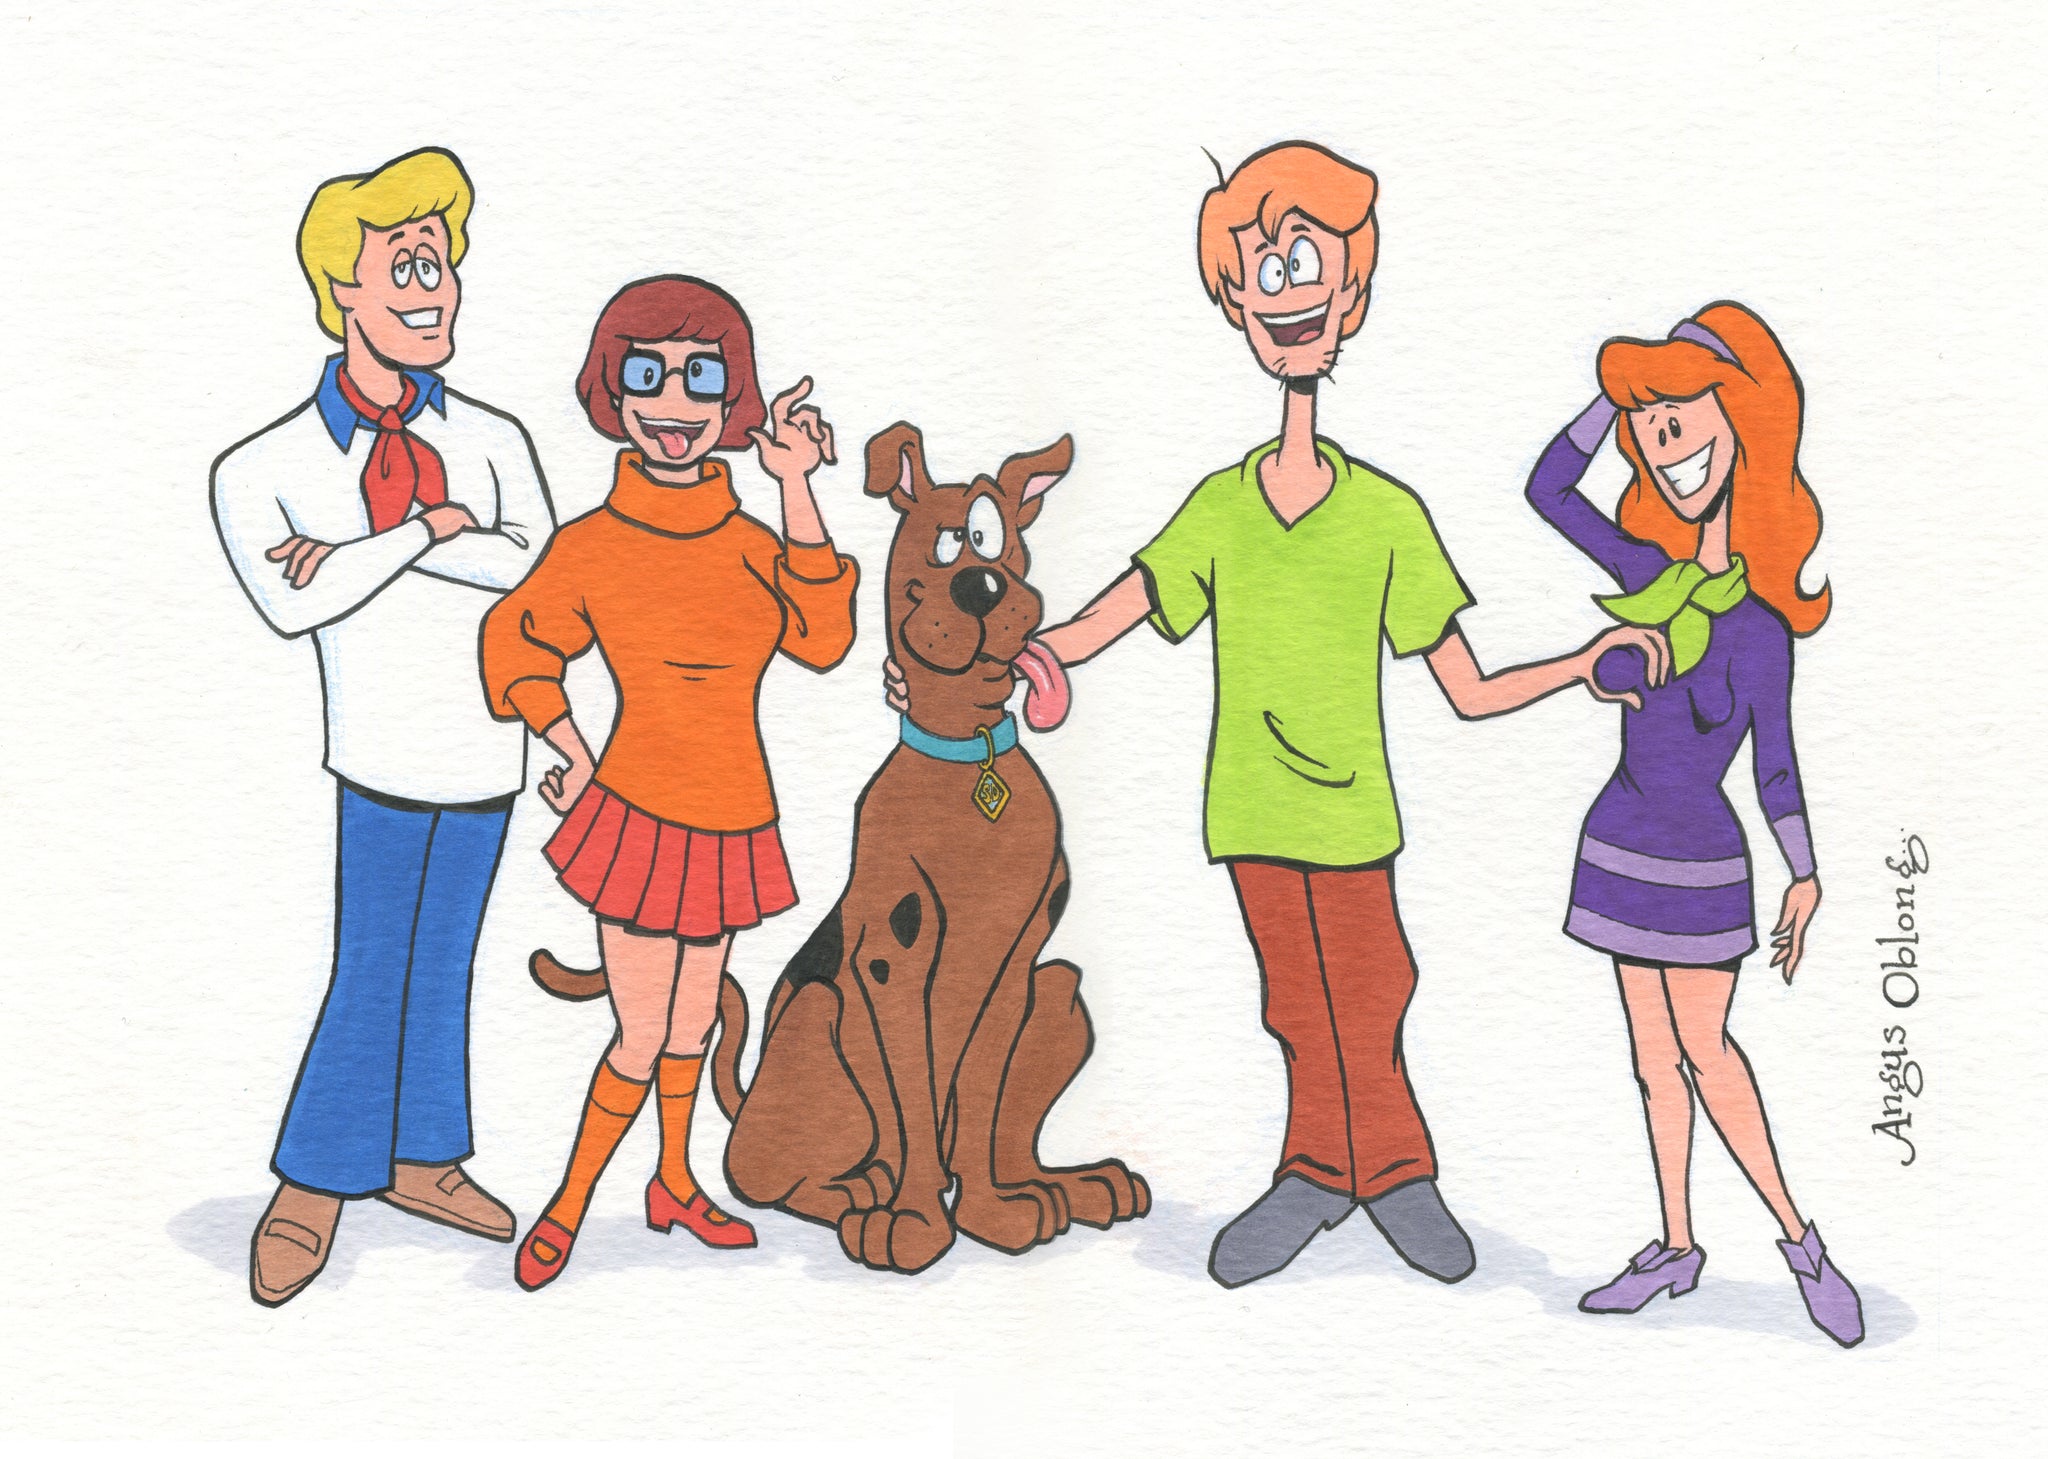 Scooby Doo & The Gang.